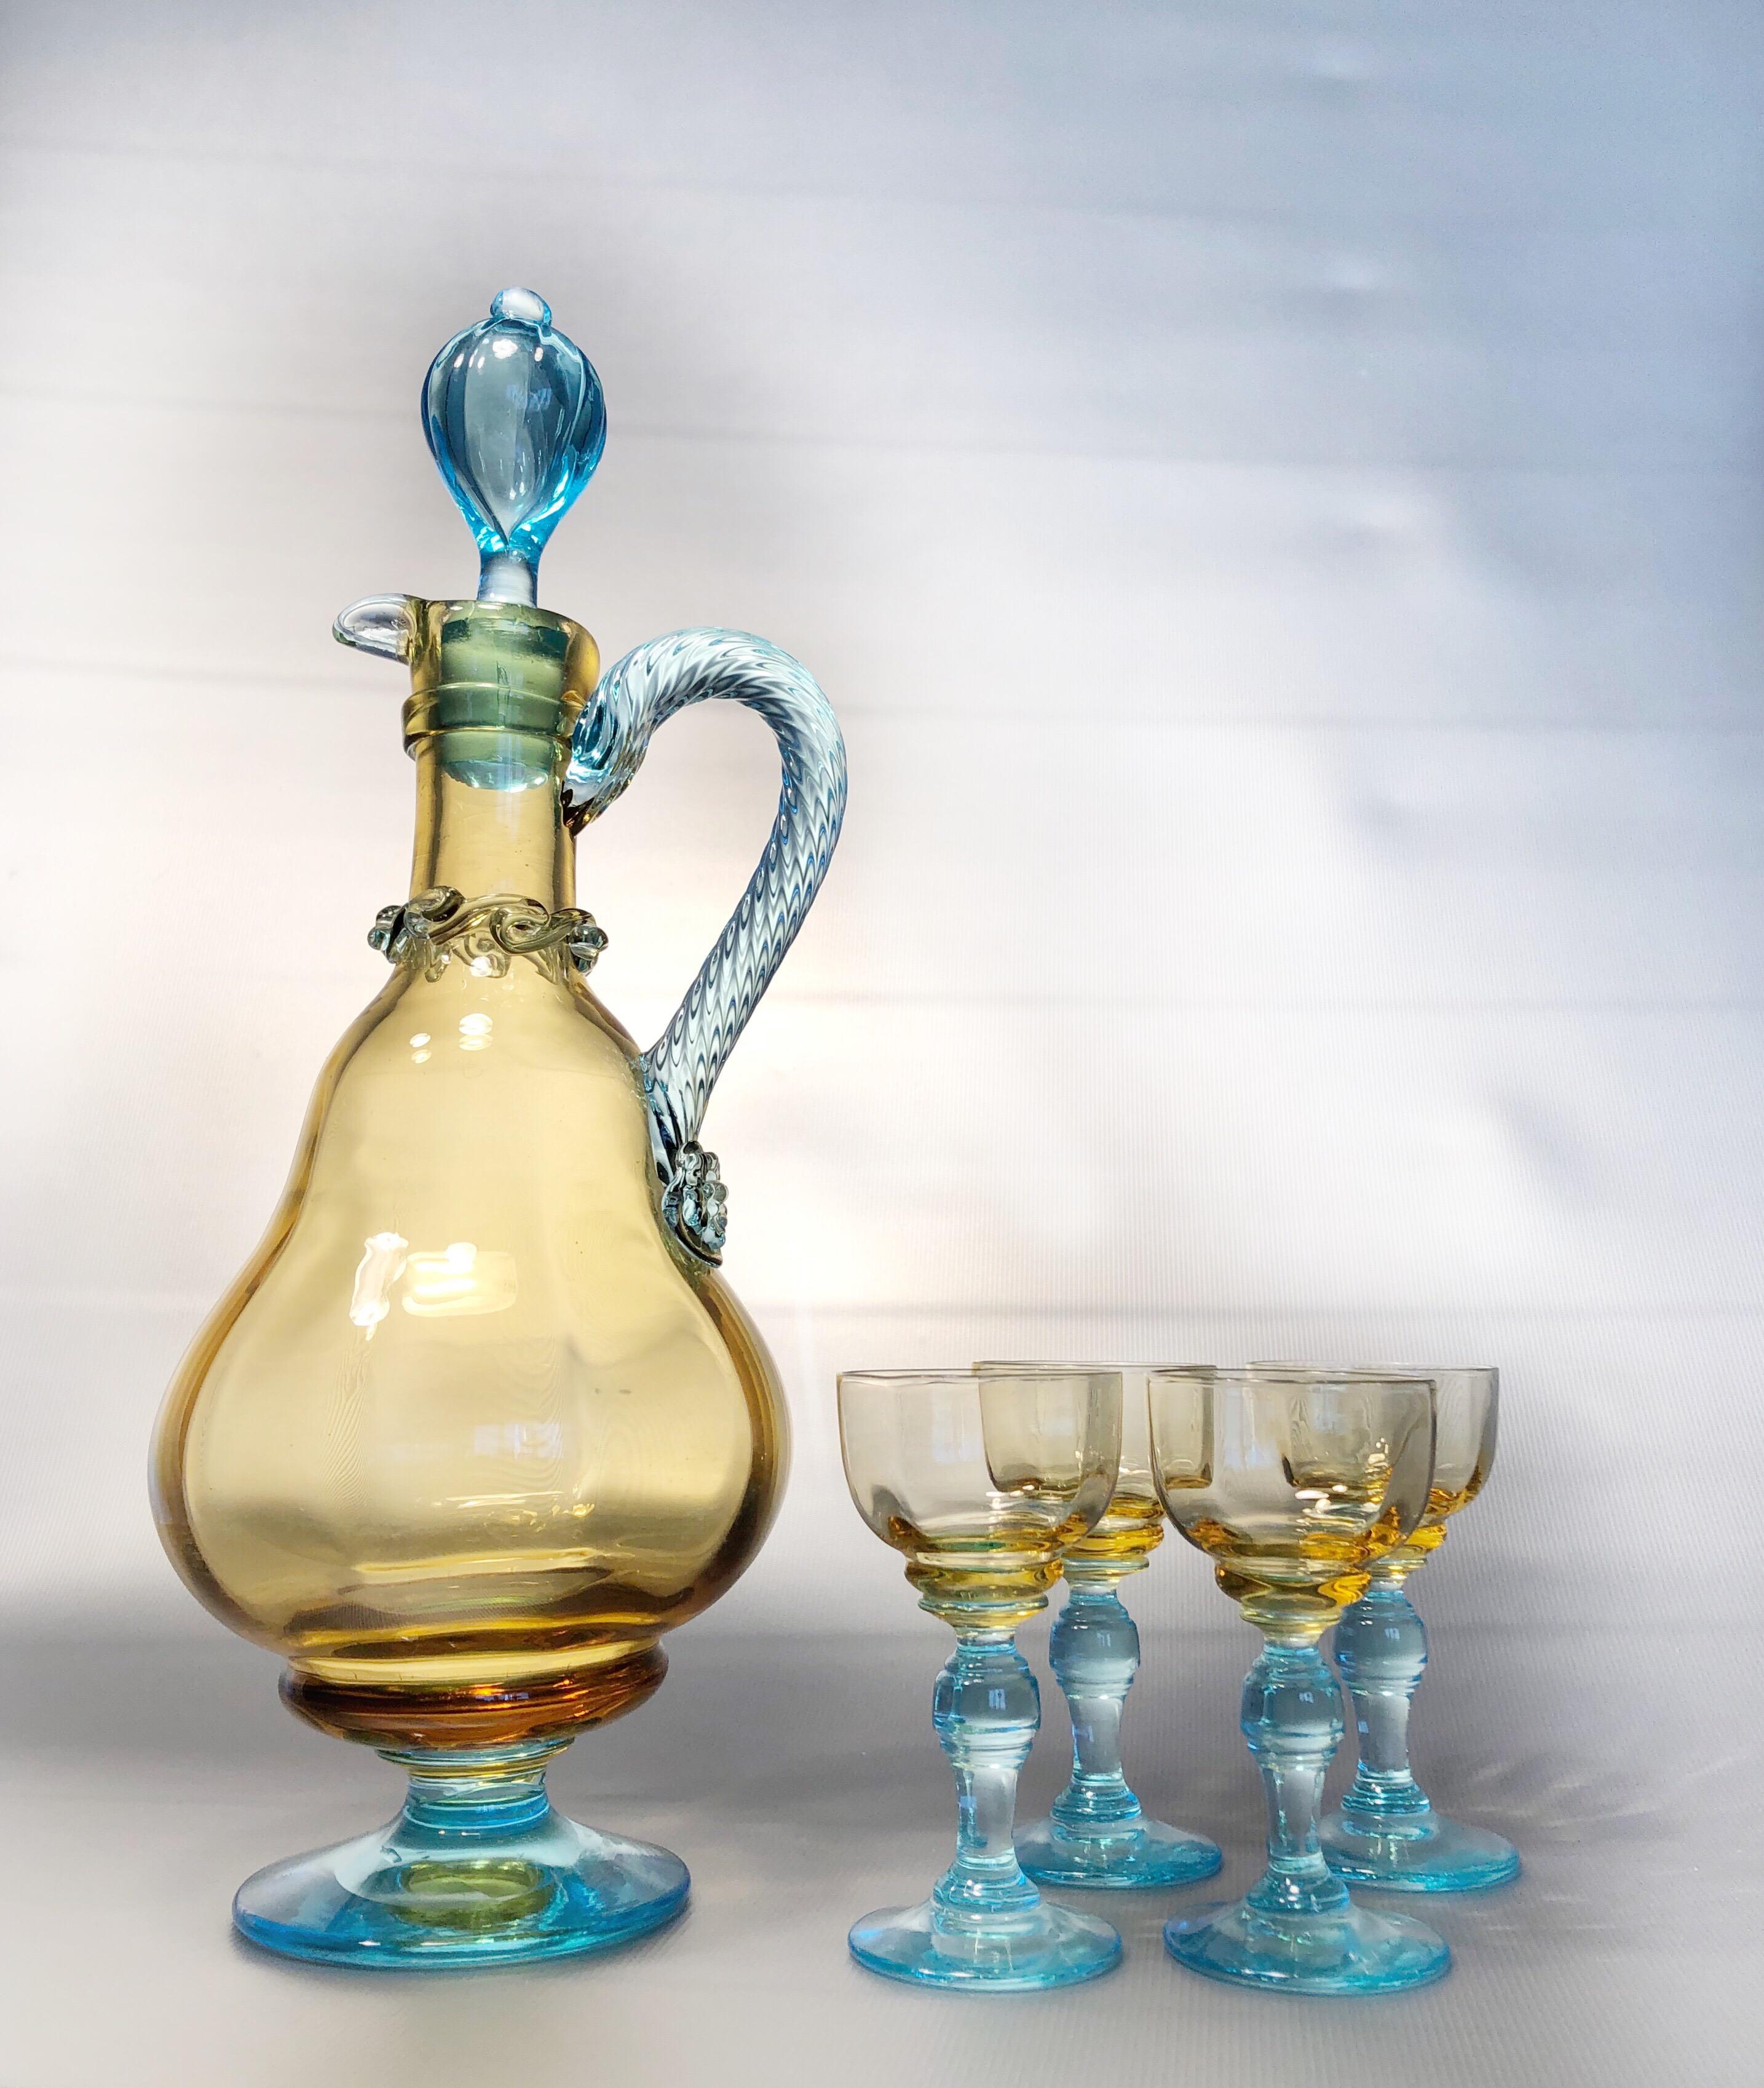 Italian Murano Art Glass Carafe with Four Glasses Yellow and Blue, 1940s Italy SALE